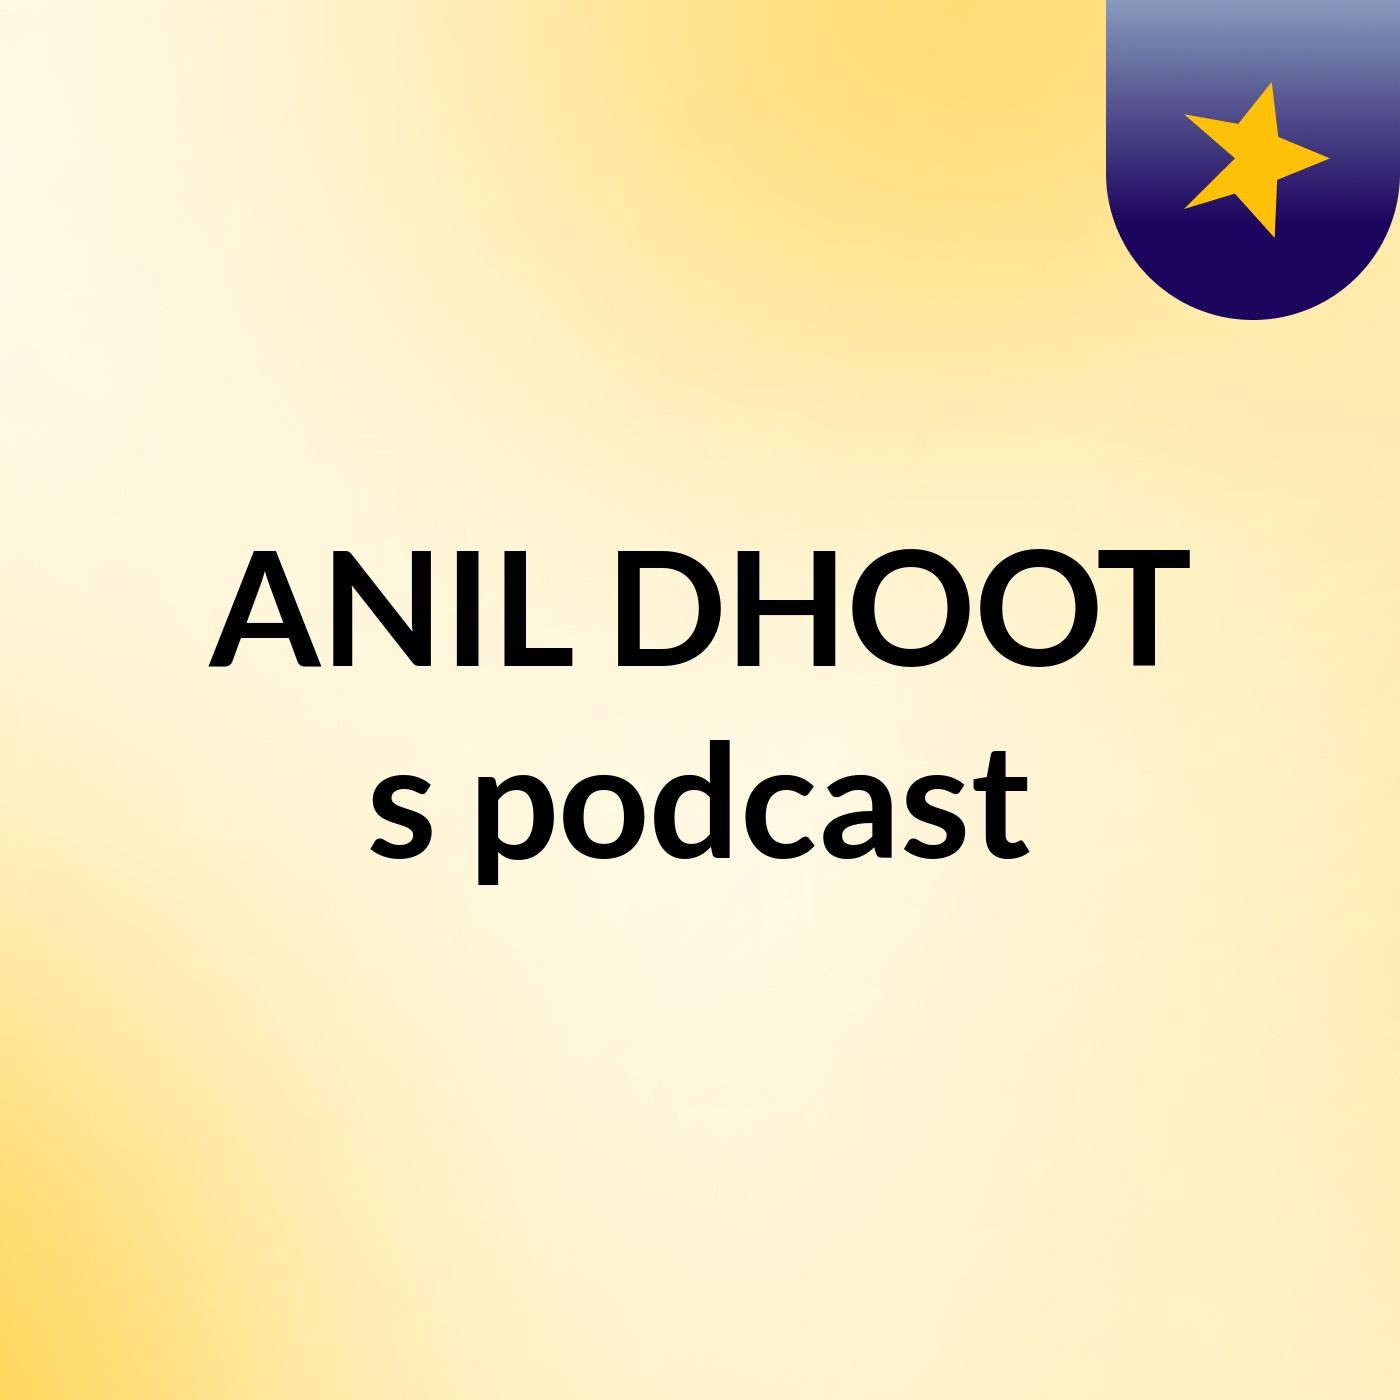 Episode 2 - ANIL DHOOT's podcast